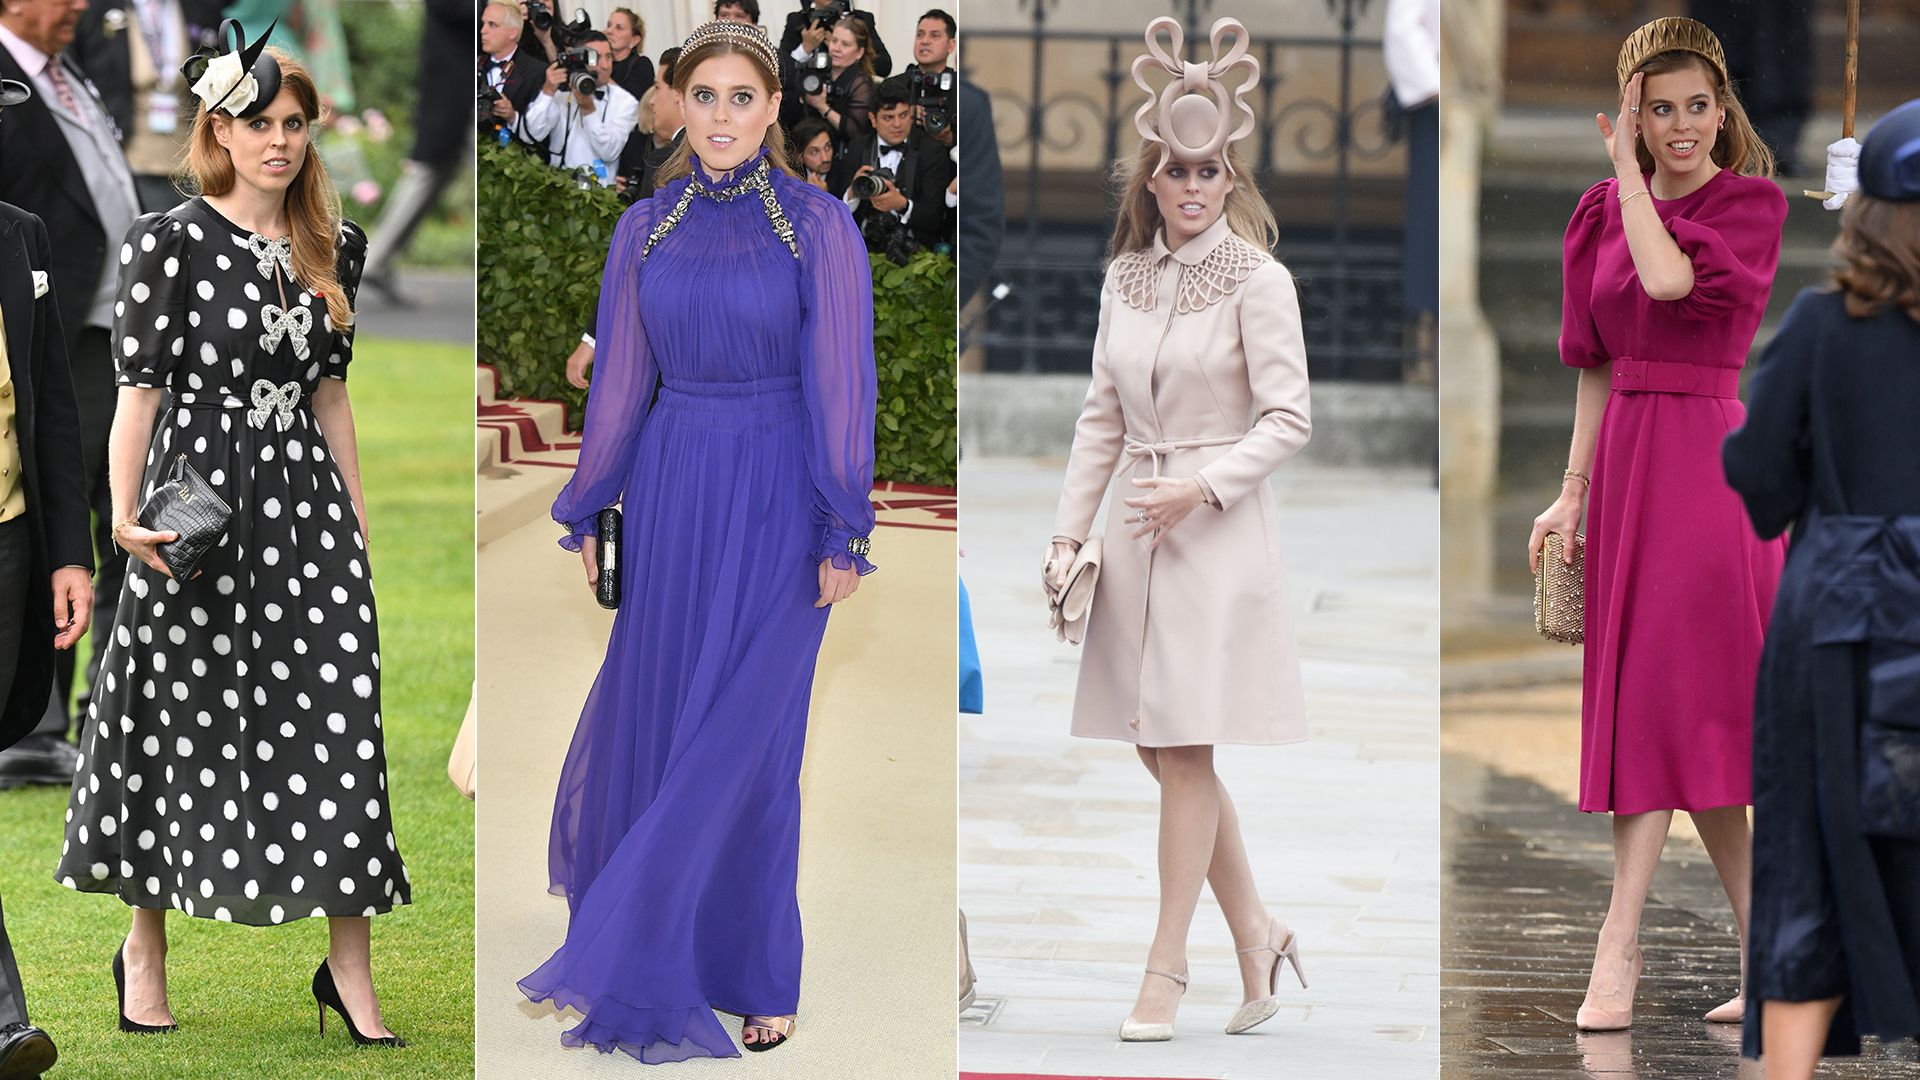 How Princess Beatrice became the true style queen of the royal family